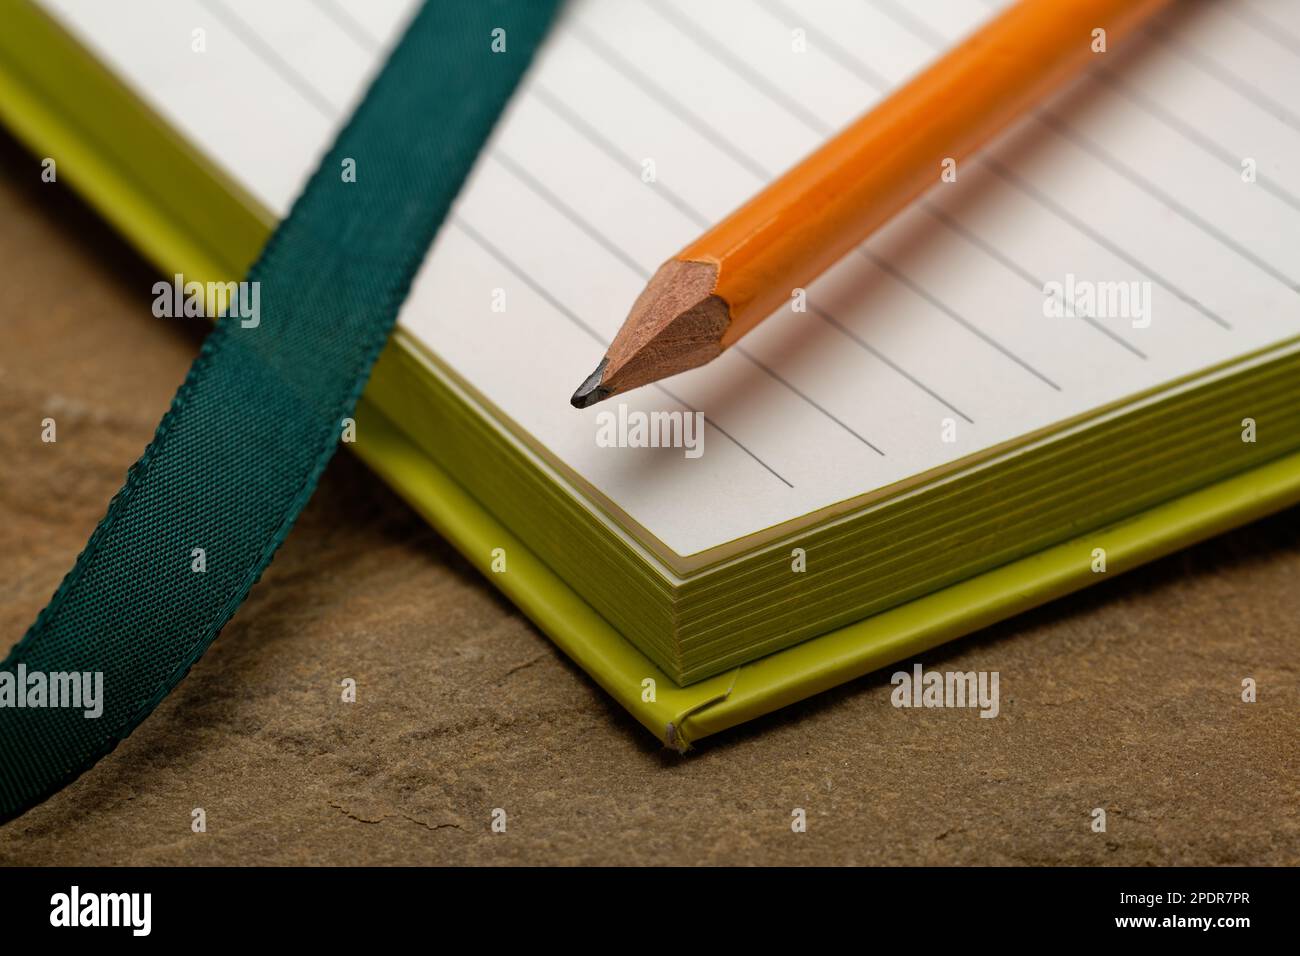 A lined notebook with a pencil. Ready to take notes, sketch ideas and write plans. Pencil and paper at the ready. Stock Photo